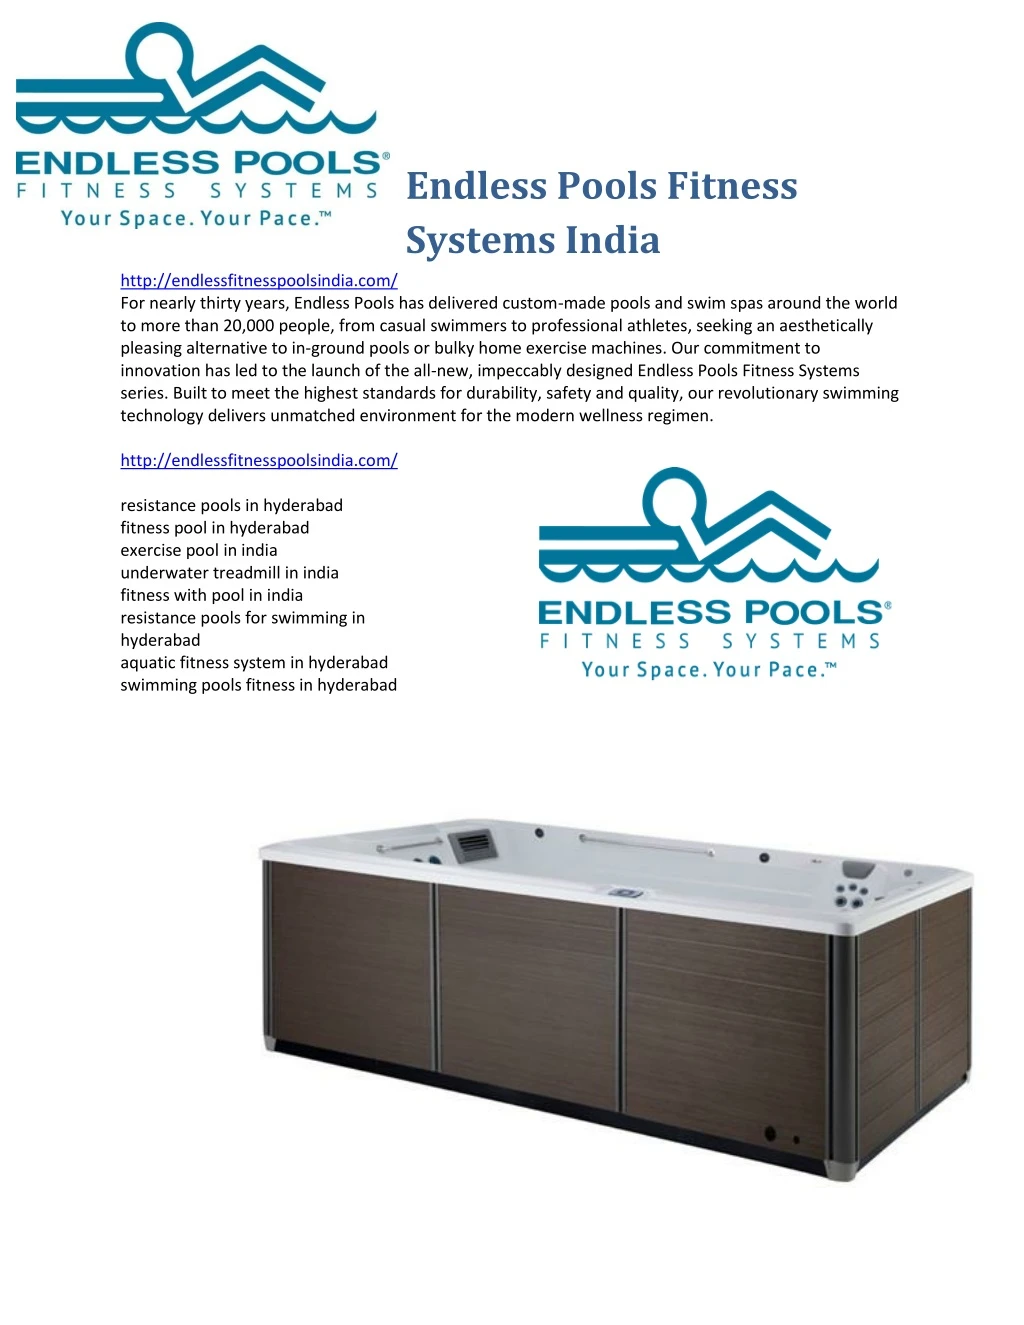 endless pools fitness systems india